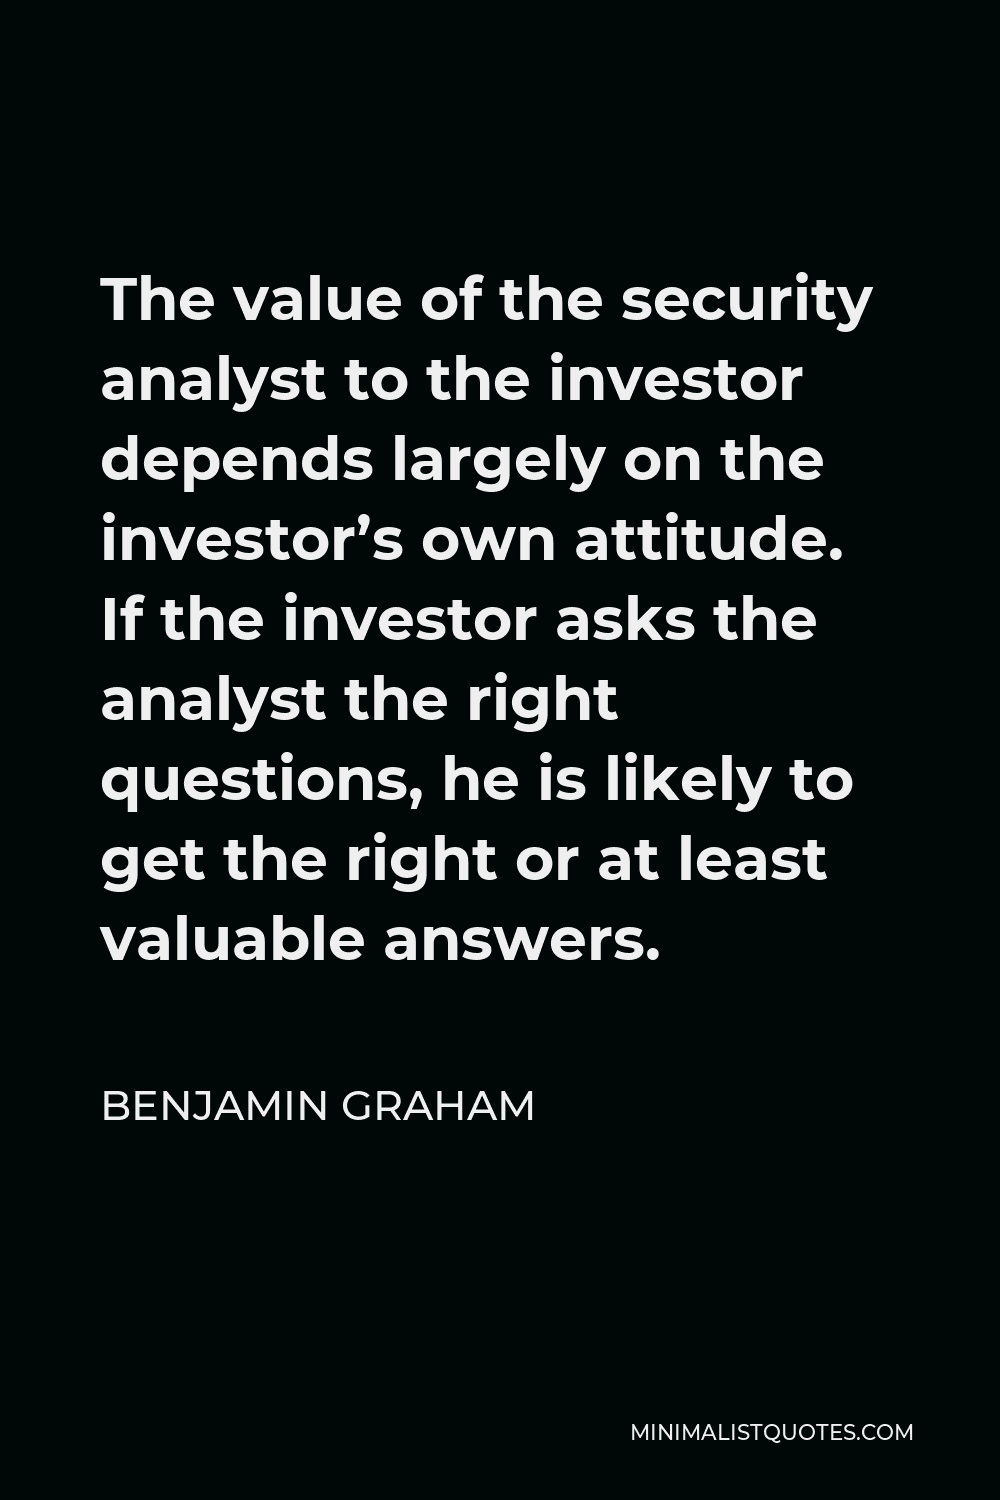 Benjamin Graham Quote - The value of the security analyst to the investor depends largely on the investor’s own attitude. If the investor asks the analyst the right questions, he is likely to get the right or at least valuable answers.